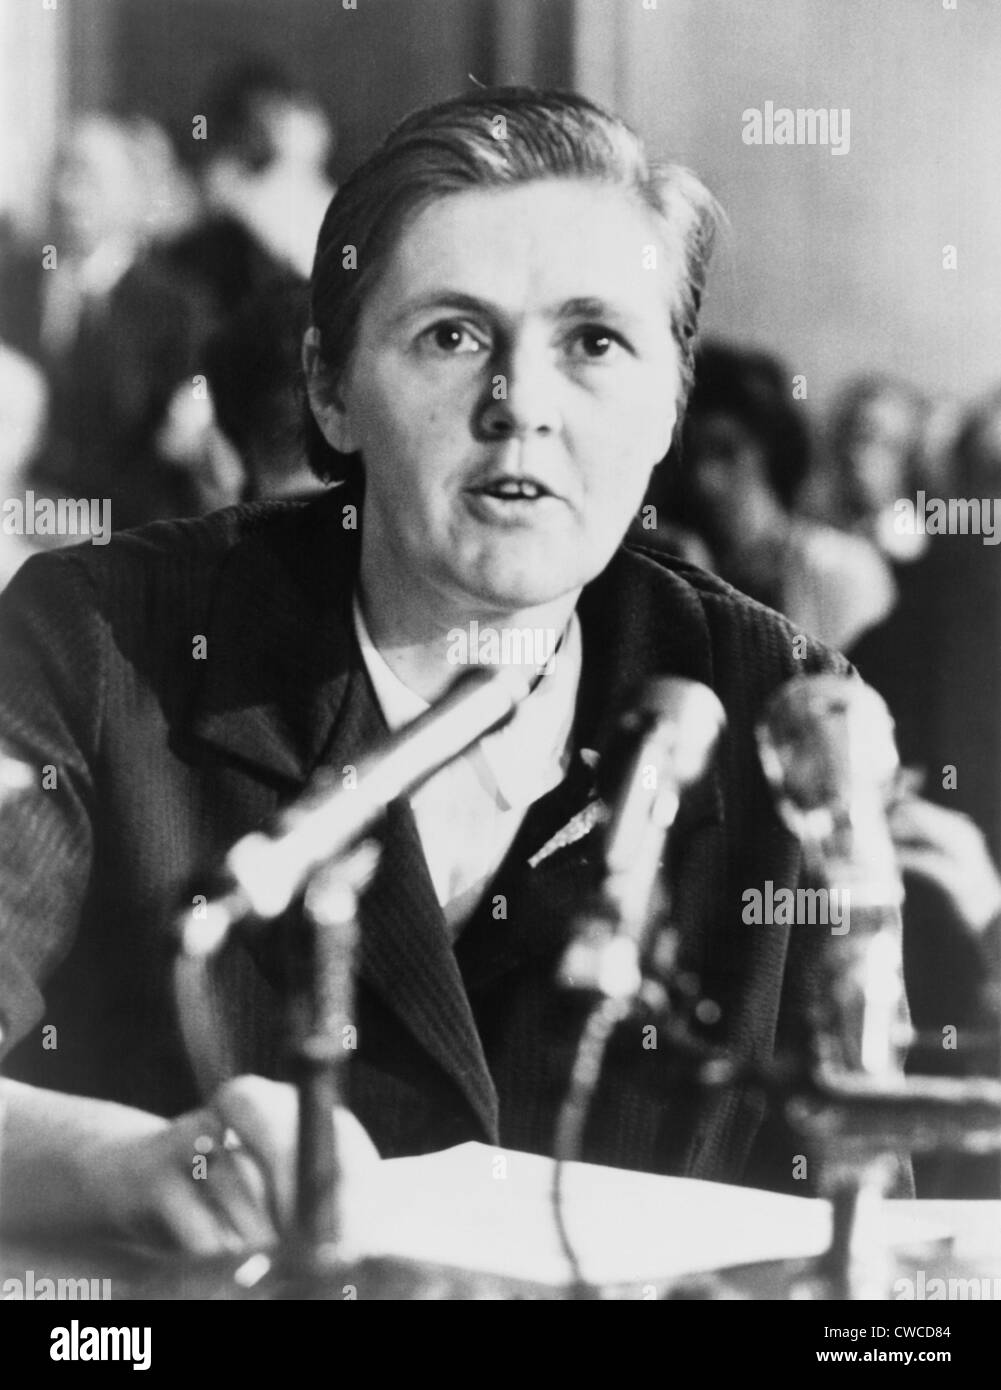 Dr. Frances O. Kelsey, a Food & Drug Administration pharmacologist who refused to authorize thalidomide US distribution. Photo Stock Photo